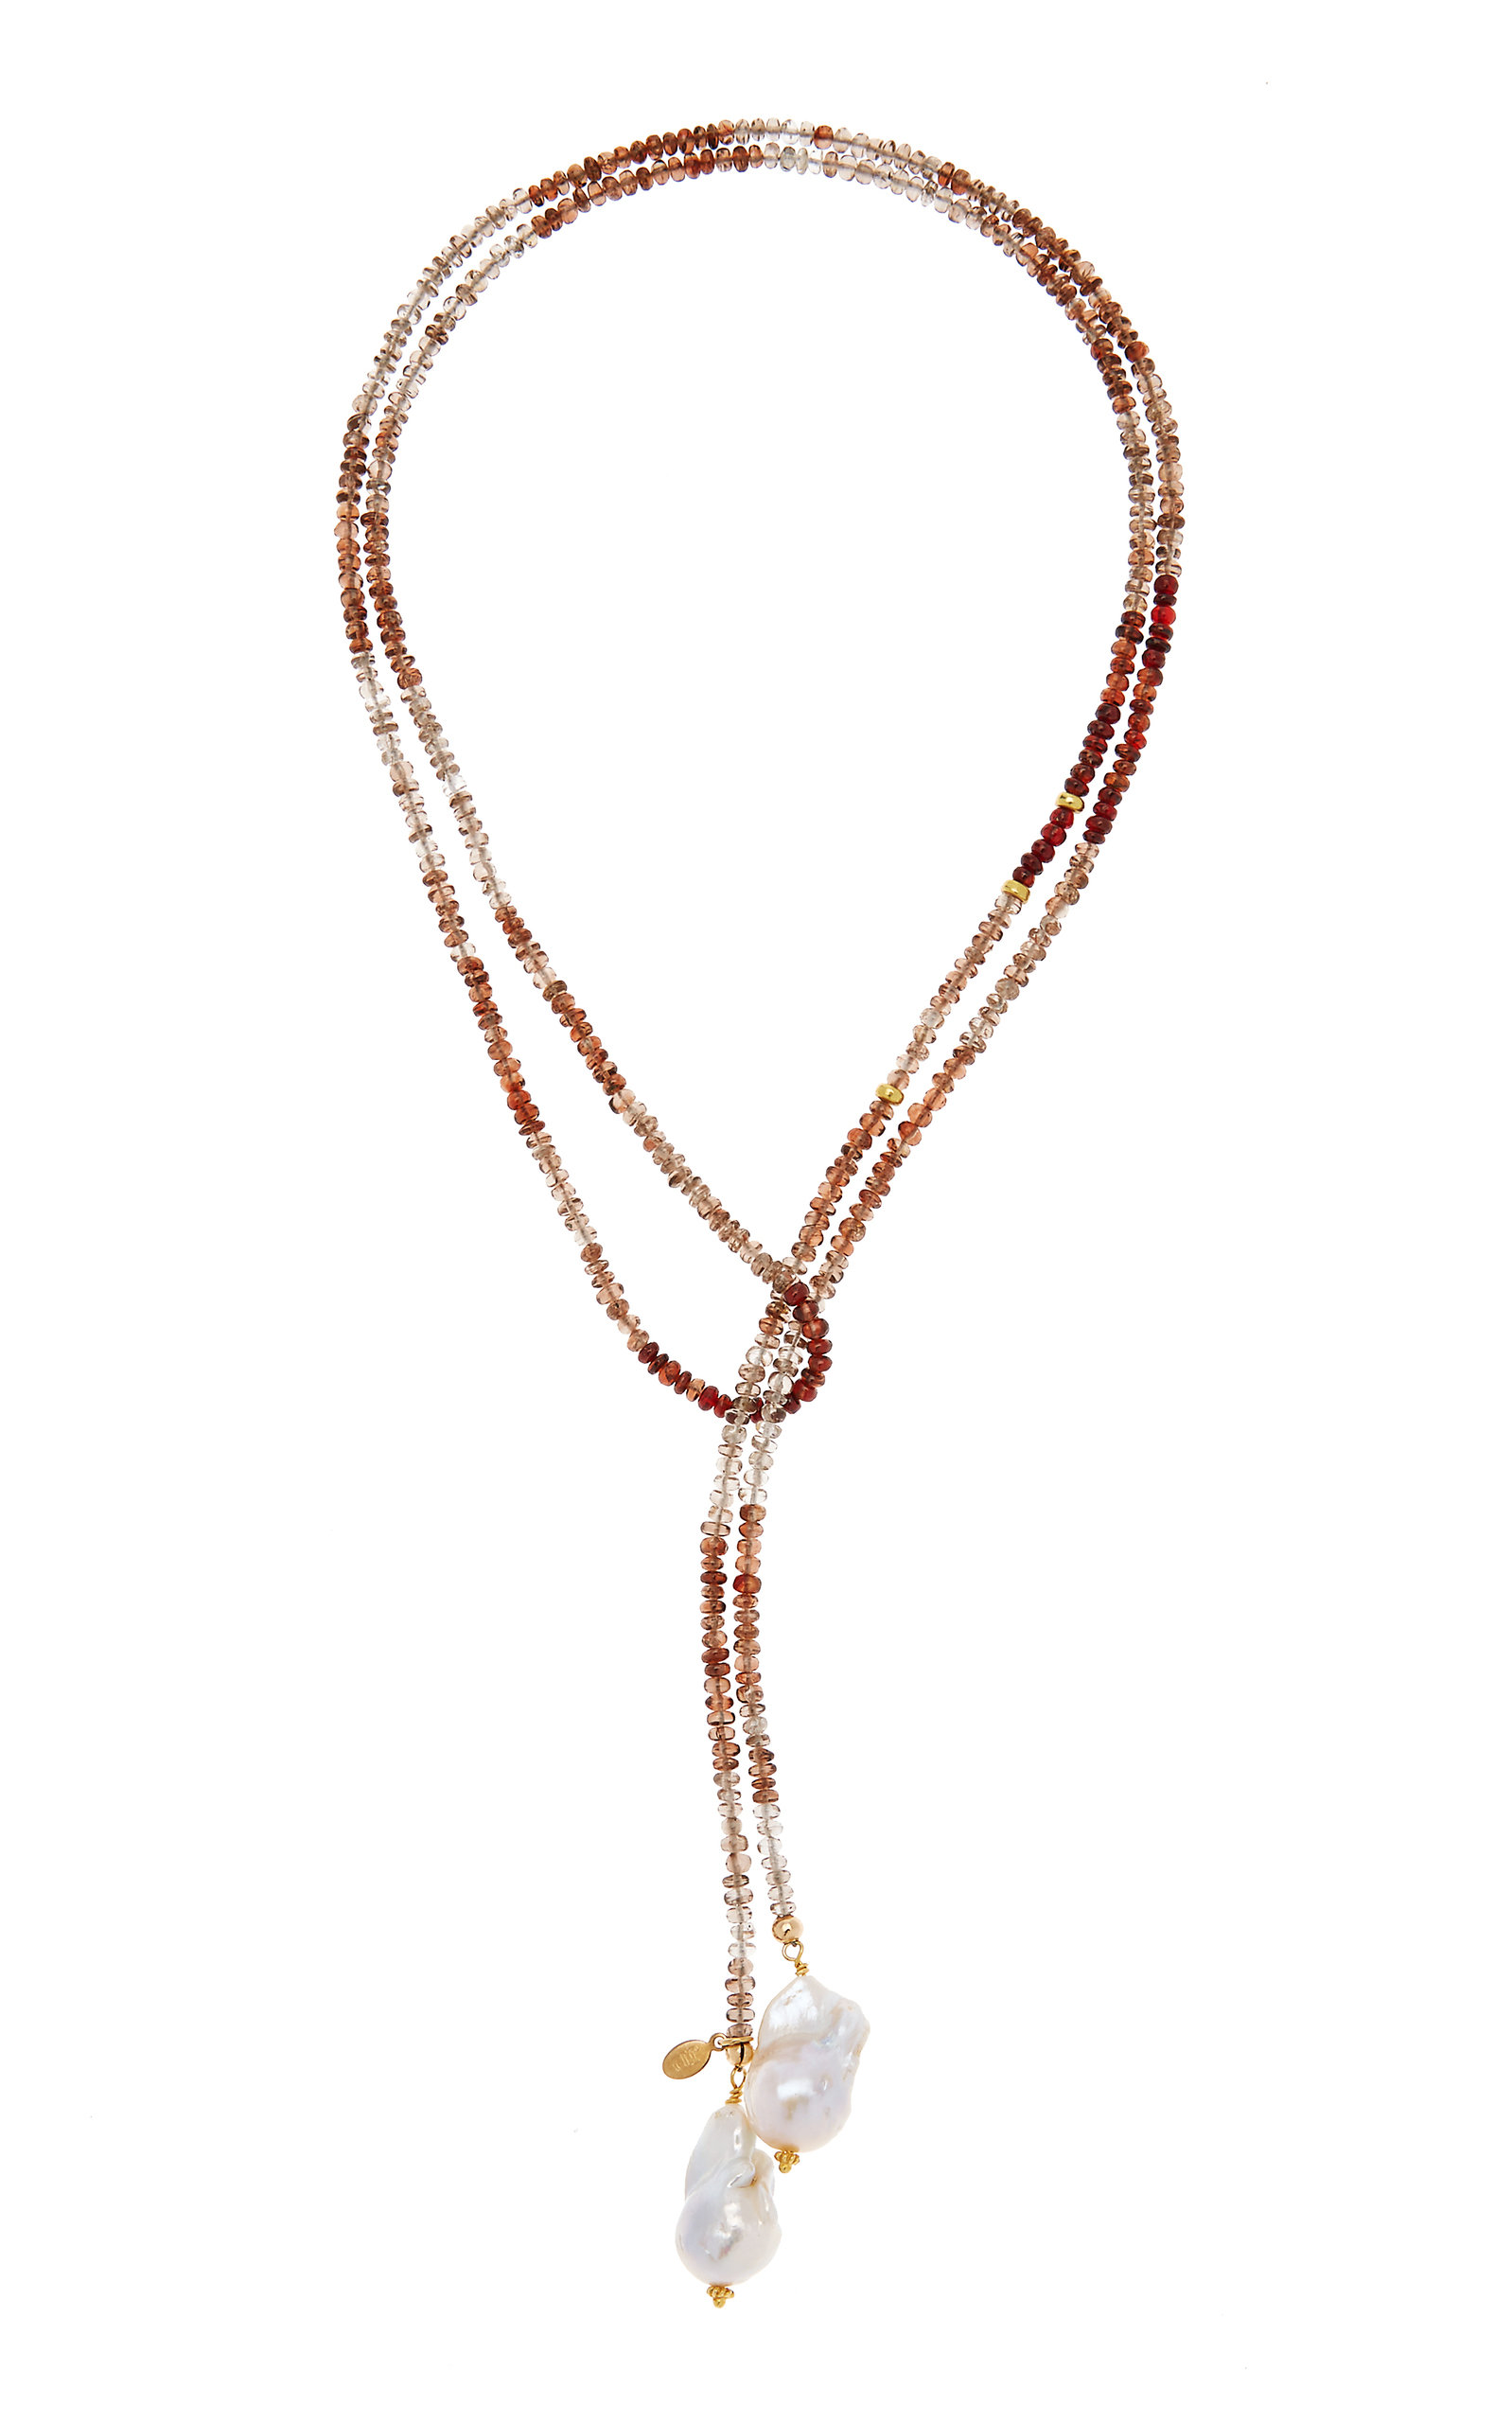 Exclusive Pearl Beaded Lariat Necklace